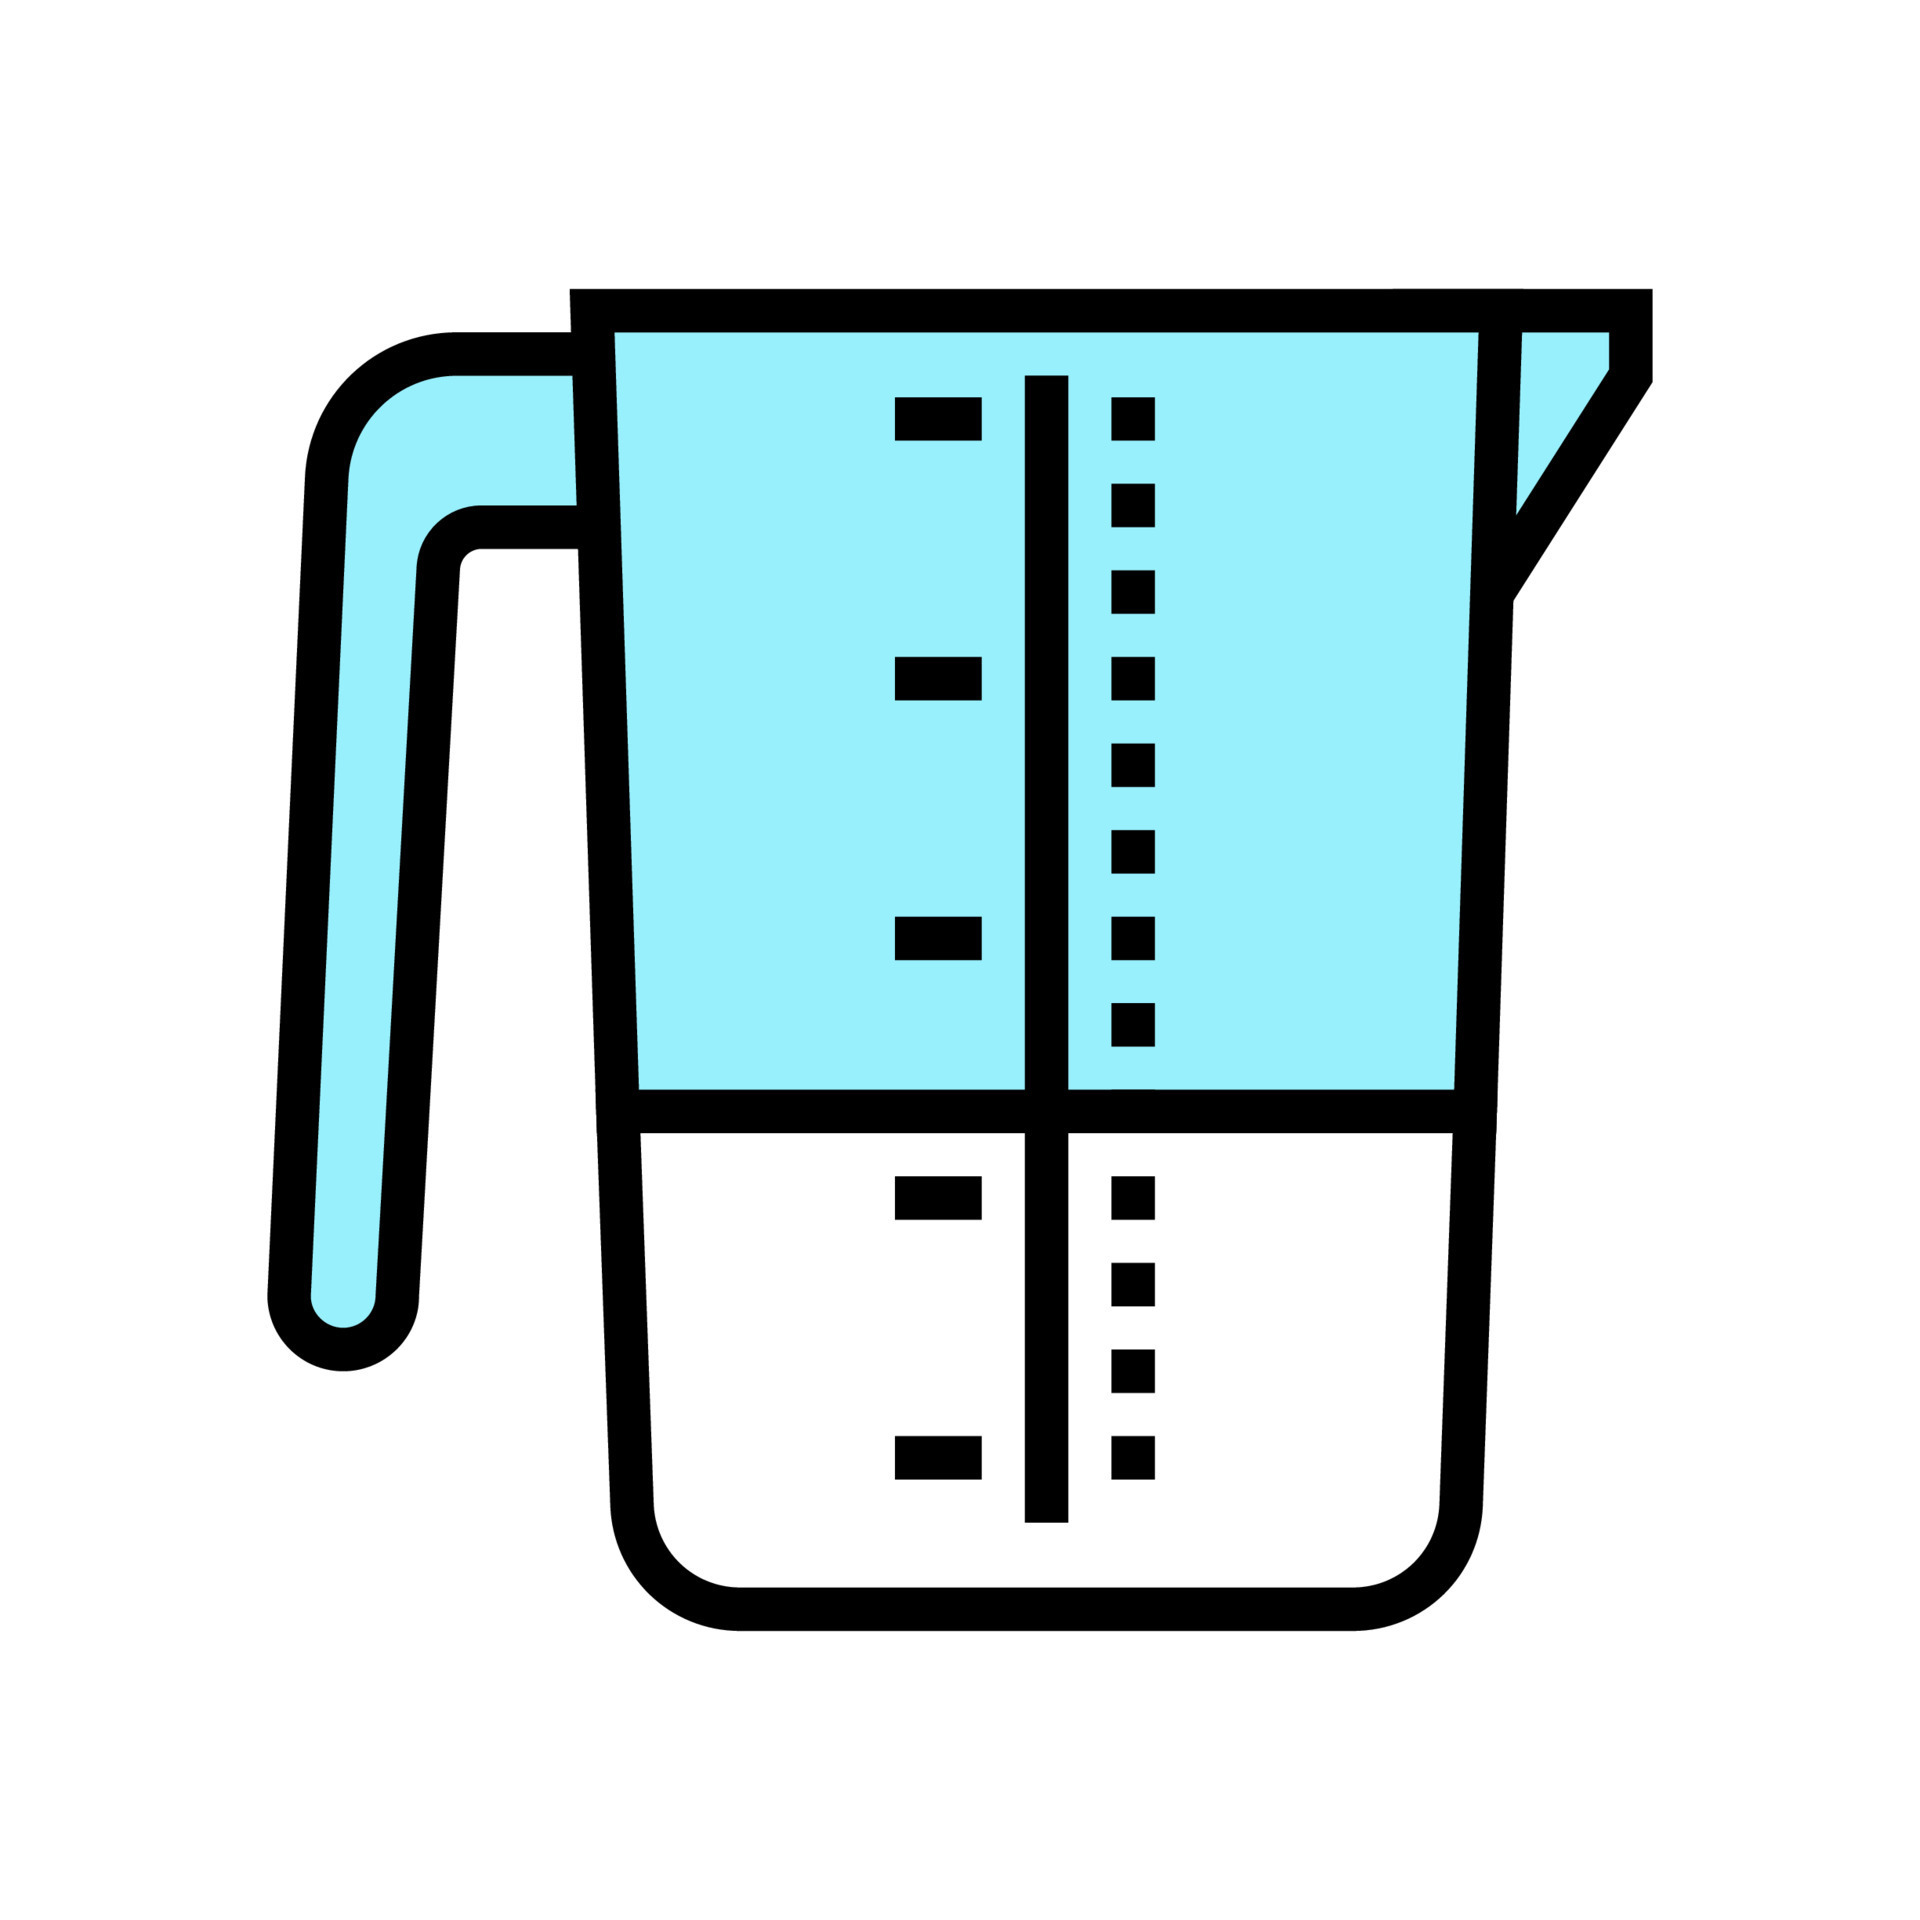 https://static.vecteezy.com/system/resources/previews/010/322/406/original/laundry-measuring-cup-color-icon-illustration-vector.jpg